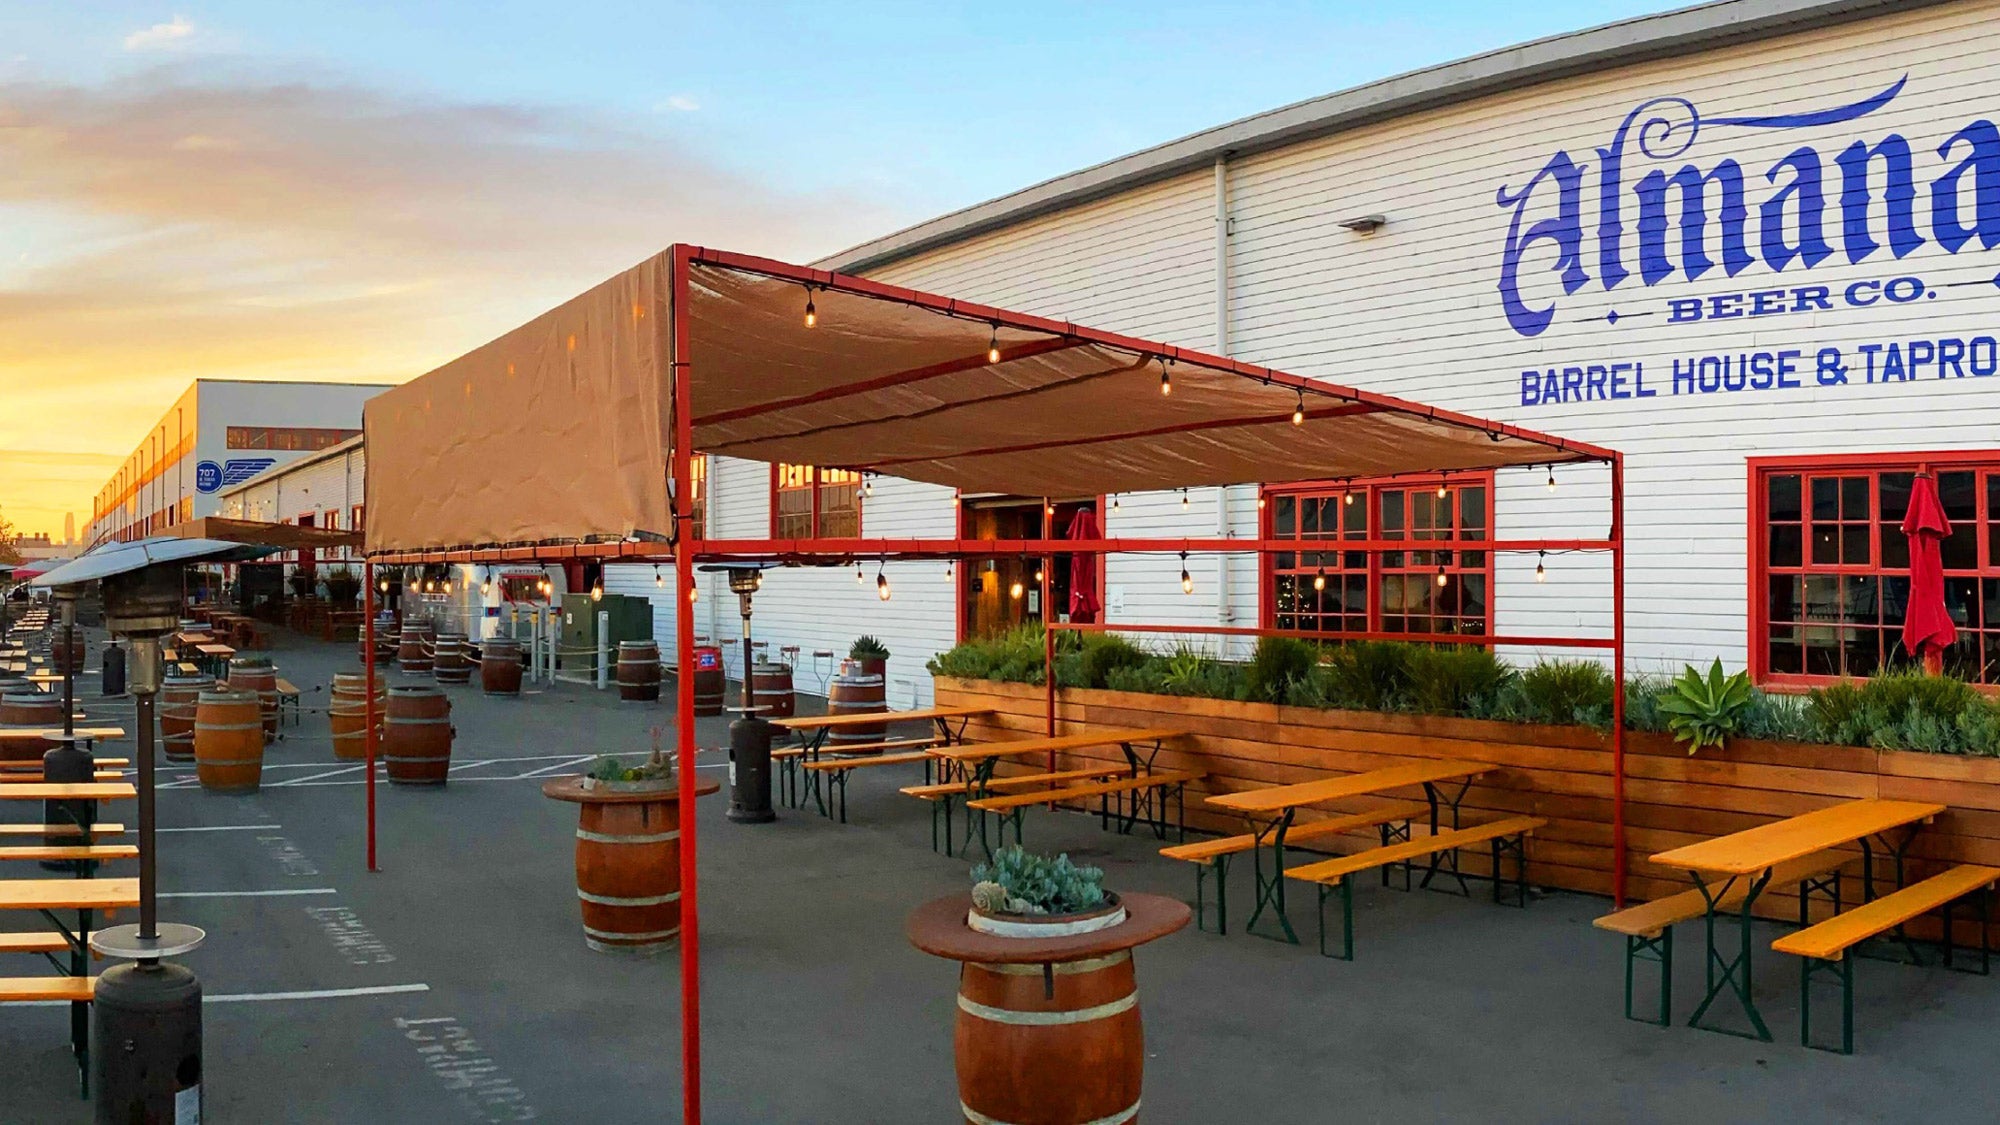 Beer Garden - Private Event Rental Space at Almanac Brewery